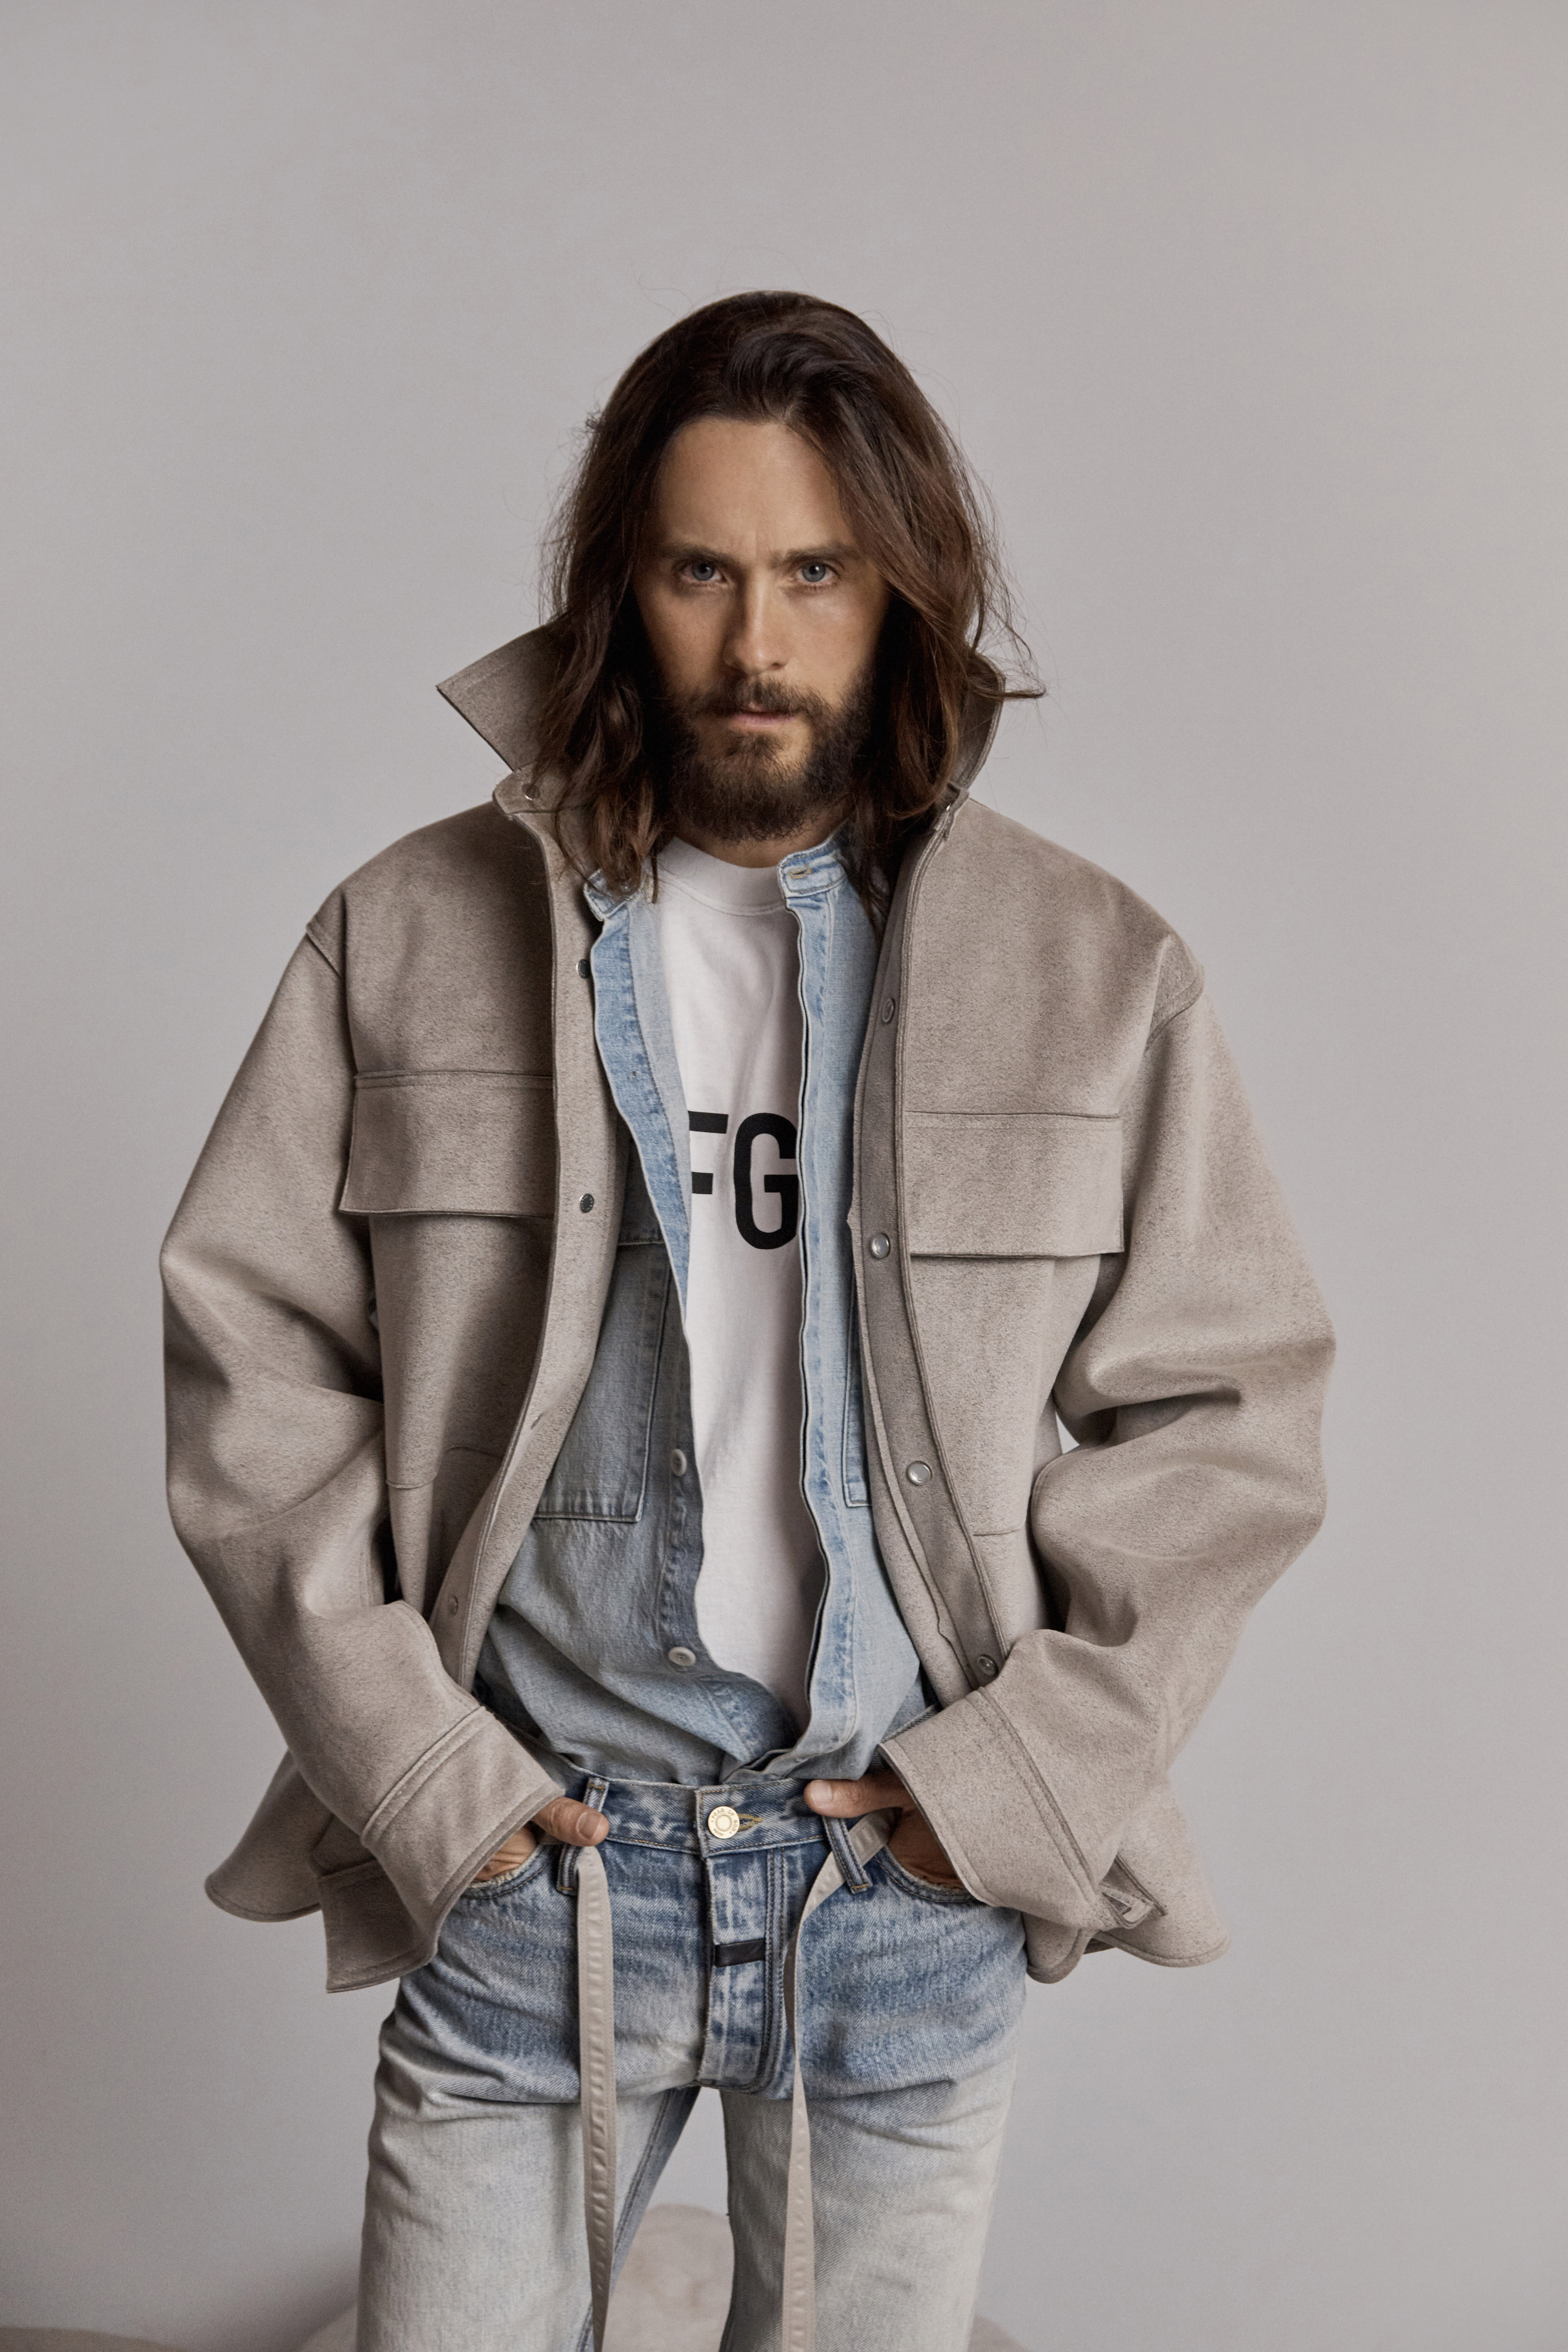 Fear of God Drops Sixth Collection Lookbook Featuring Jared Leto